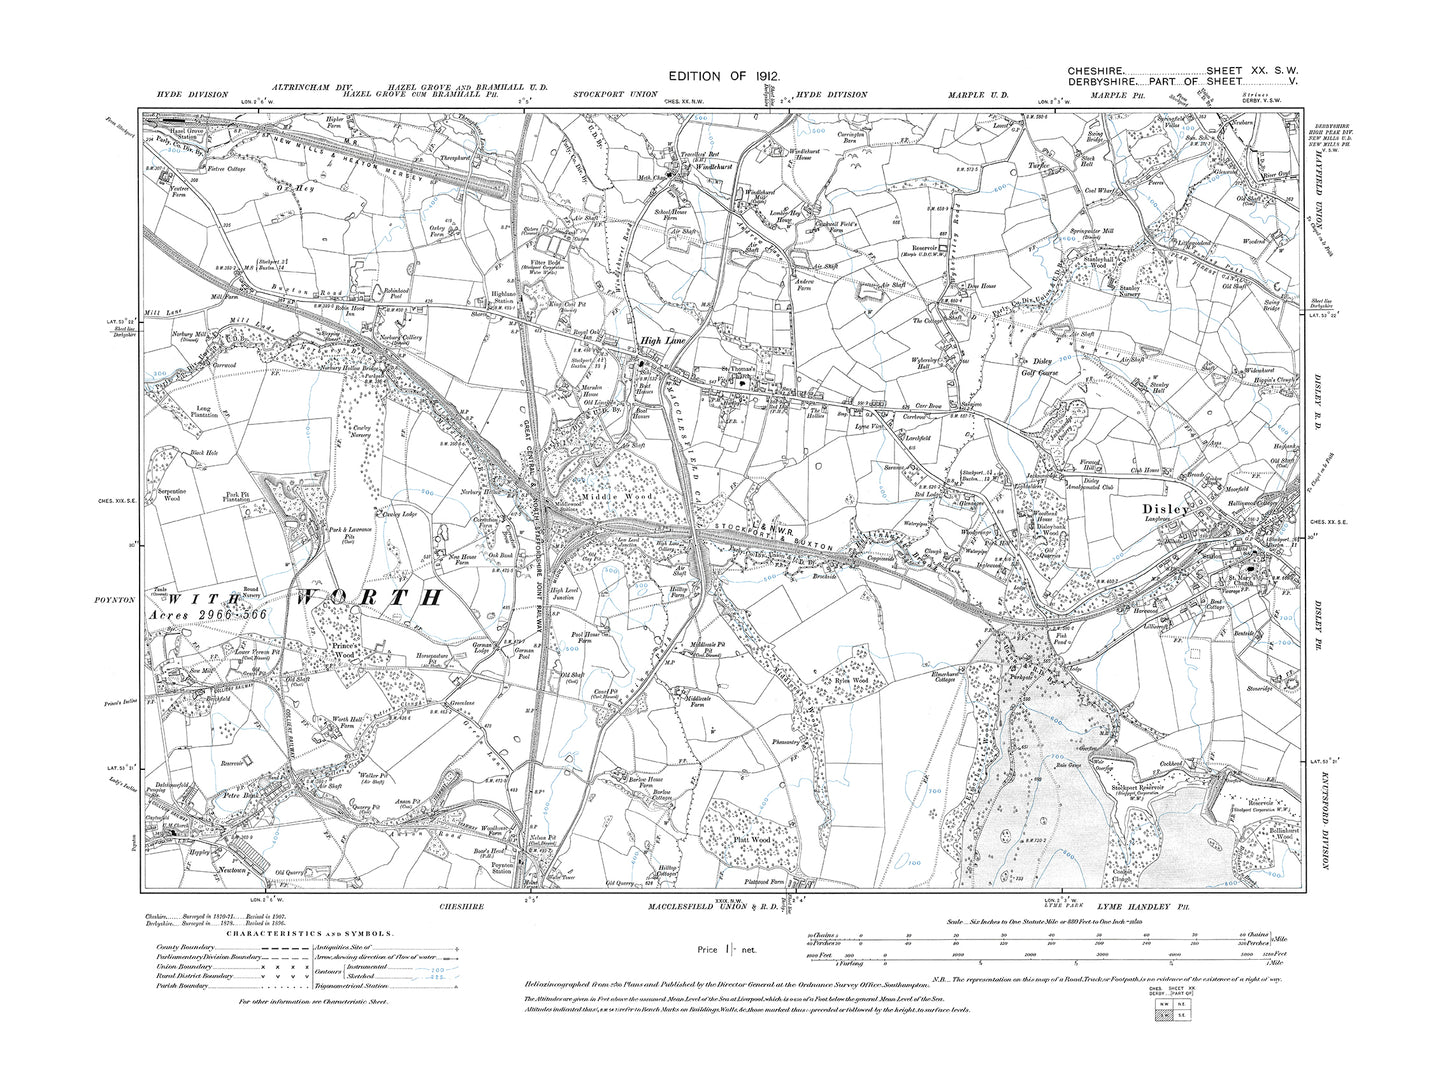 Old OS map dated 1912, showing Disley (west), High Lane in Cheshire 20SW